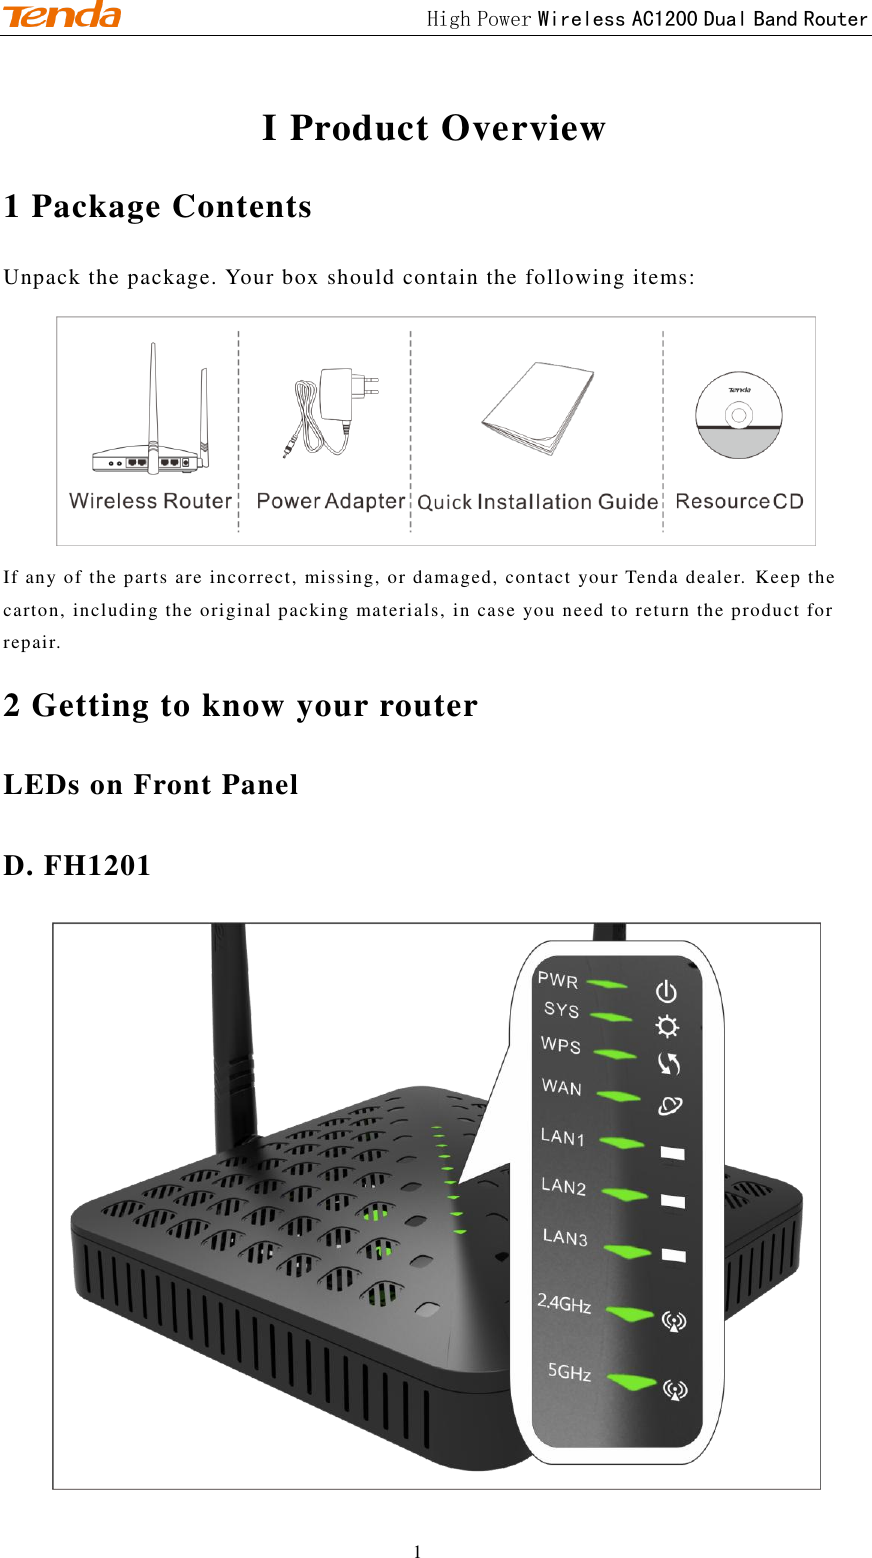                                             High Power Wireless AC1200 Dual Band Router 1 I Product Overview 1 Package Contents Unpack the package. Your box should contain the following items:  If any of the parts are incorrect, missing, or damaged, contact your Tenda dealer.  Keep the carton, including the original packing materials, in case you need to return the product for repair. 2 Getting to know your router LEDs on Front Panel D. FH1201  